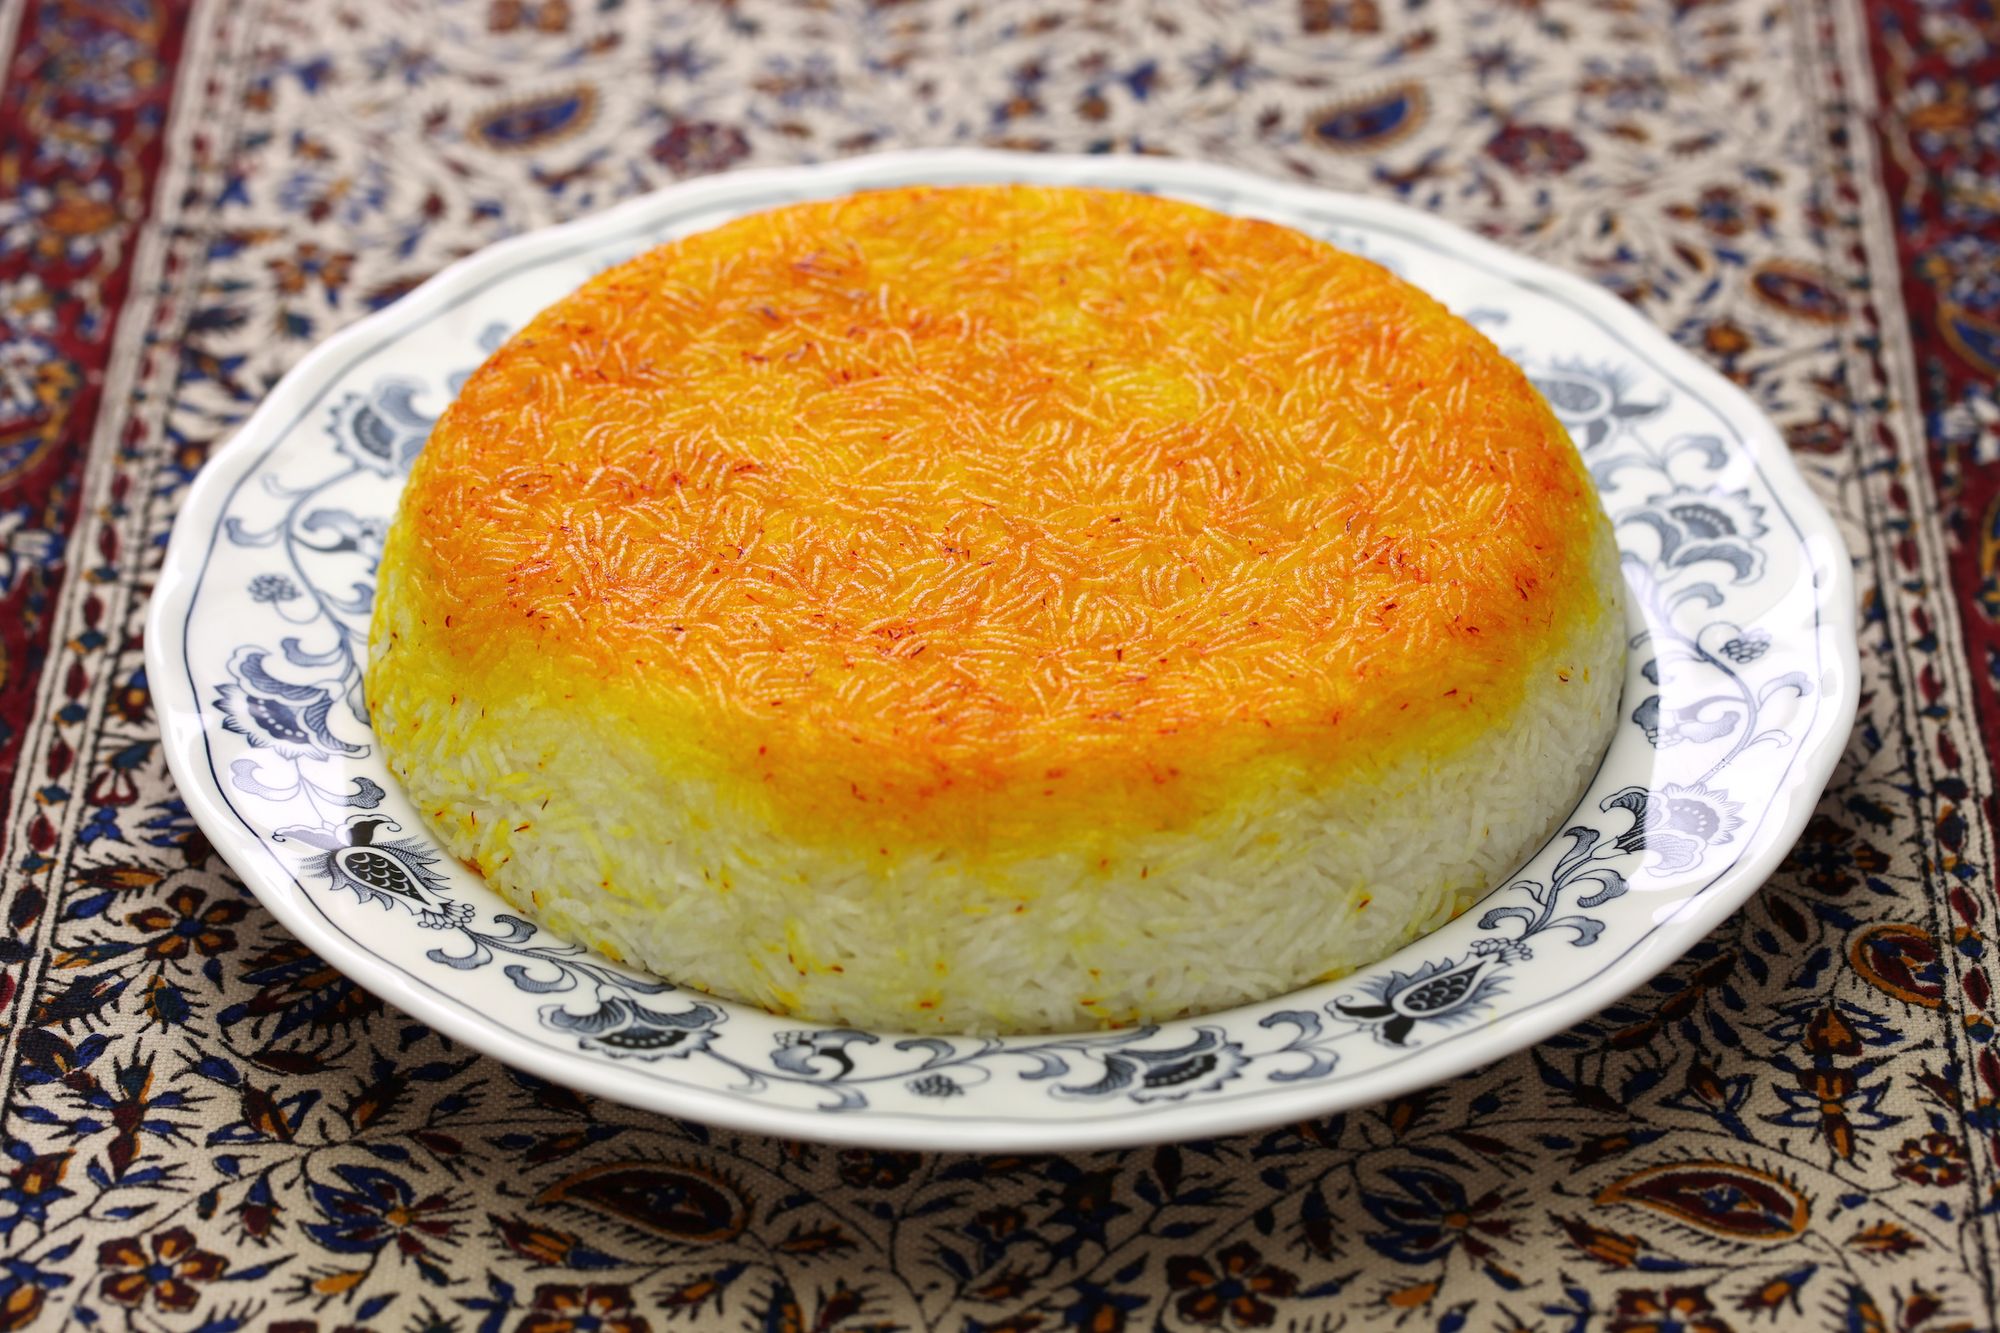 Tahdig rice on a white plate sitting in the center of a floral print table cloth.